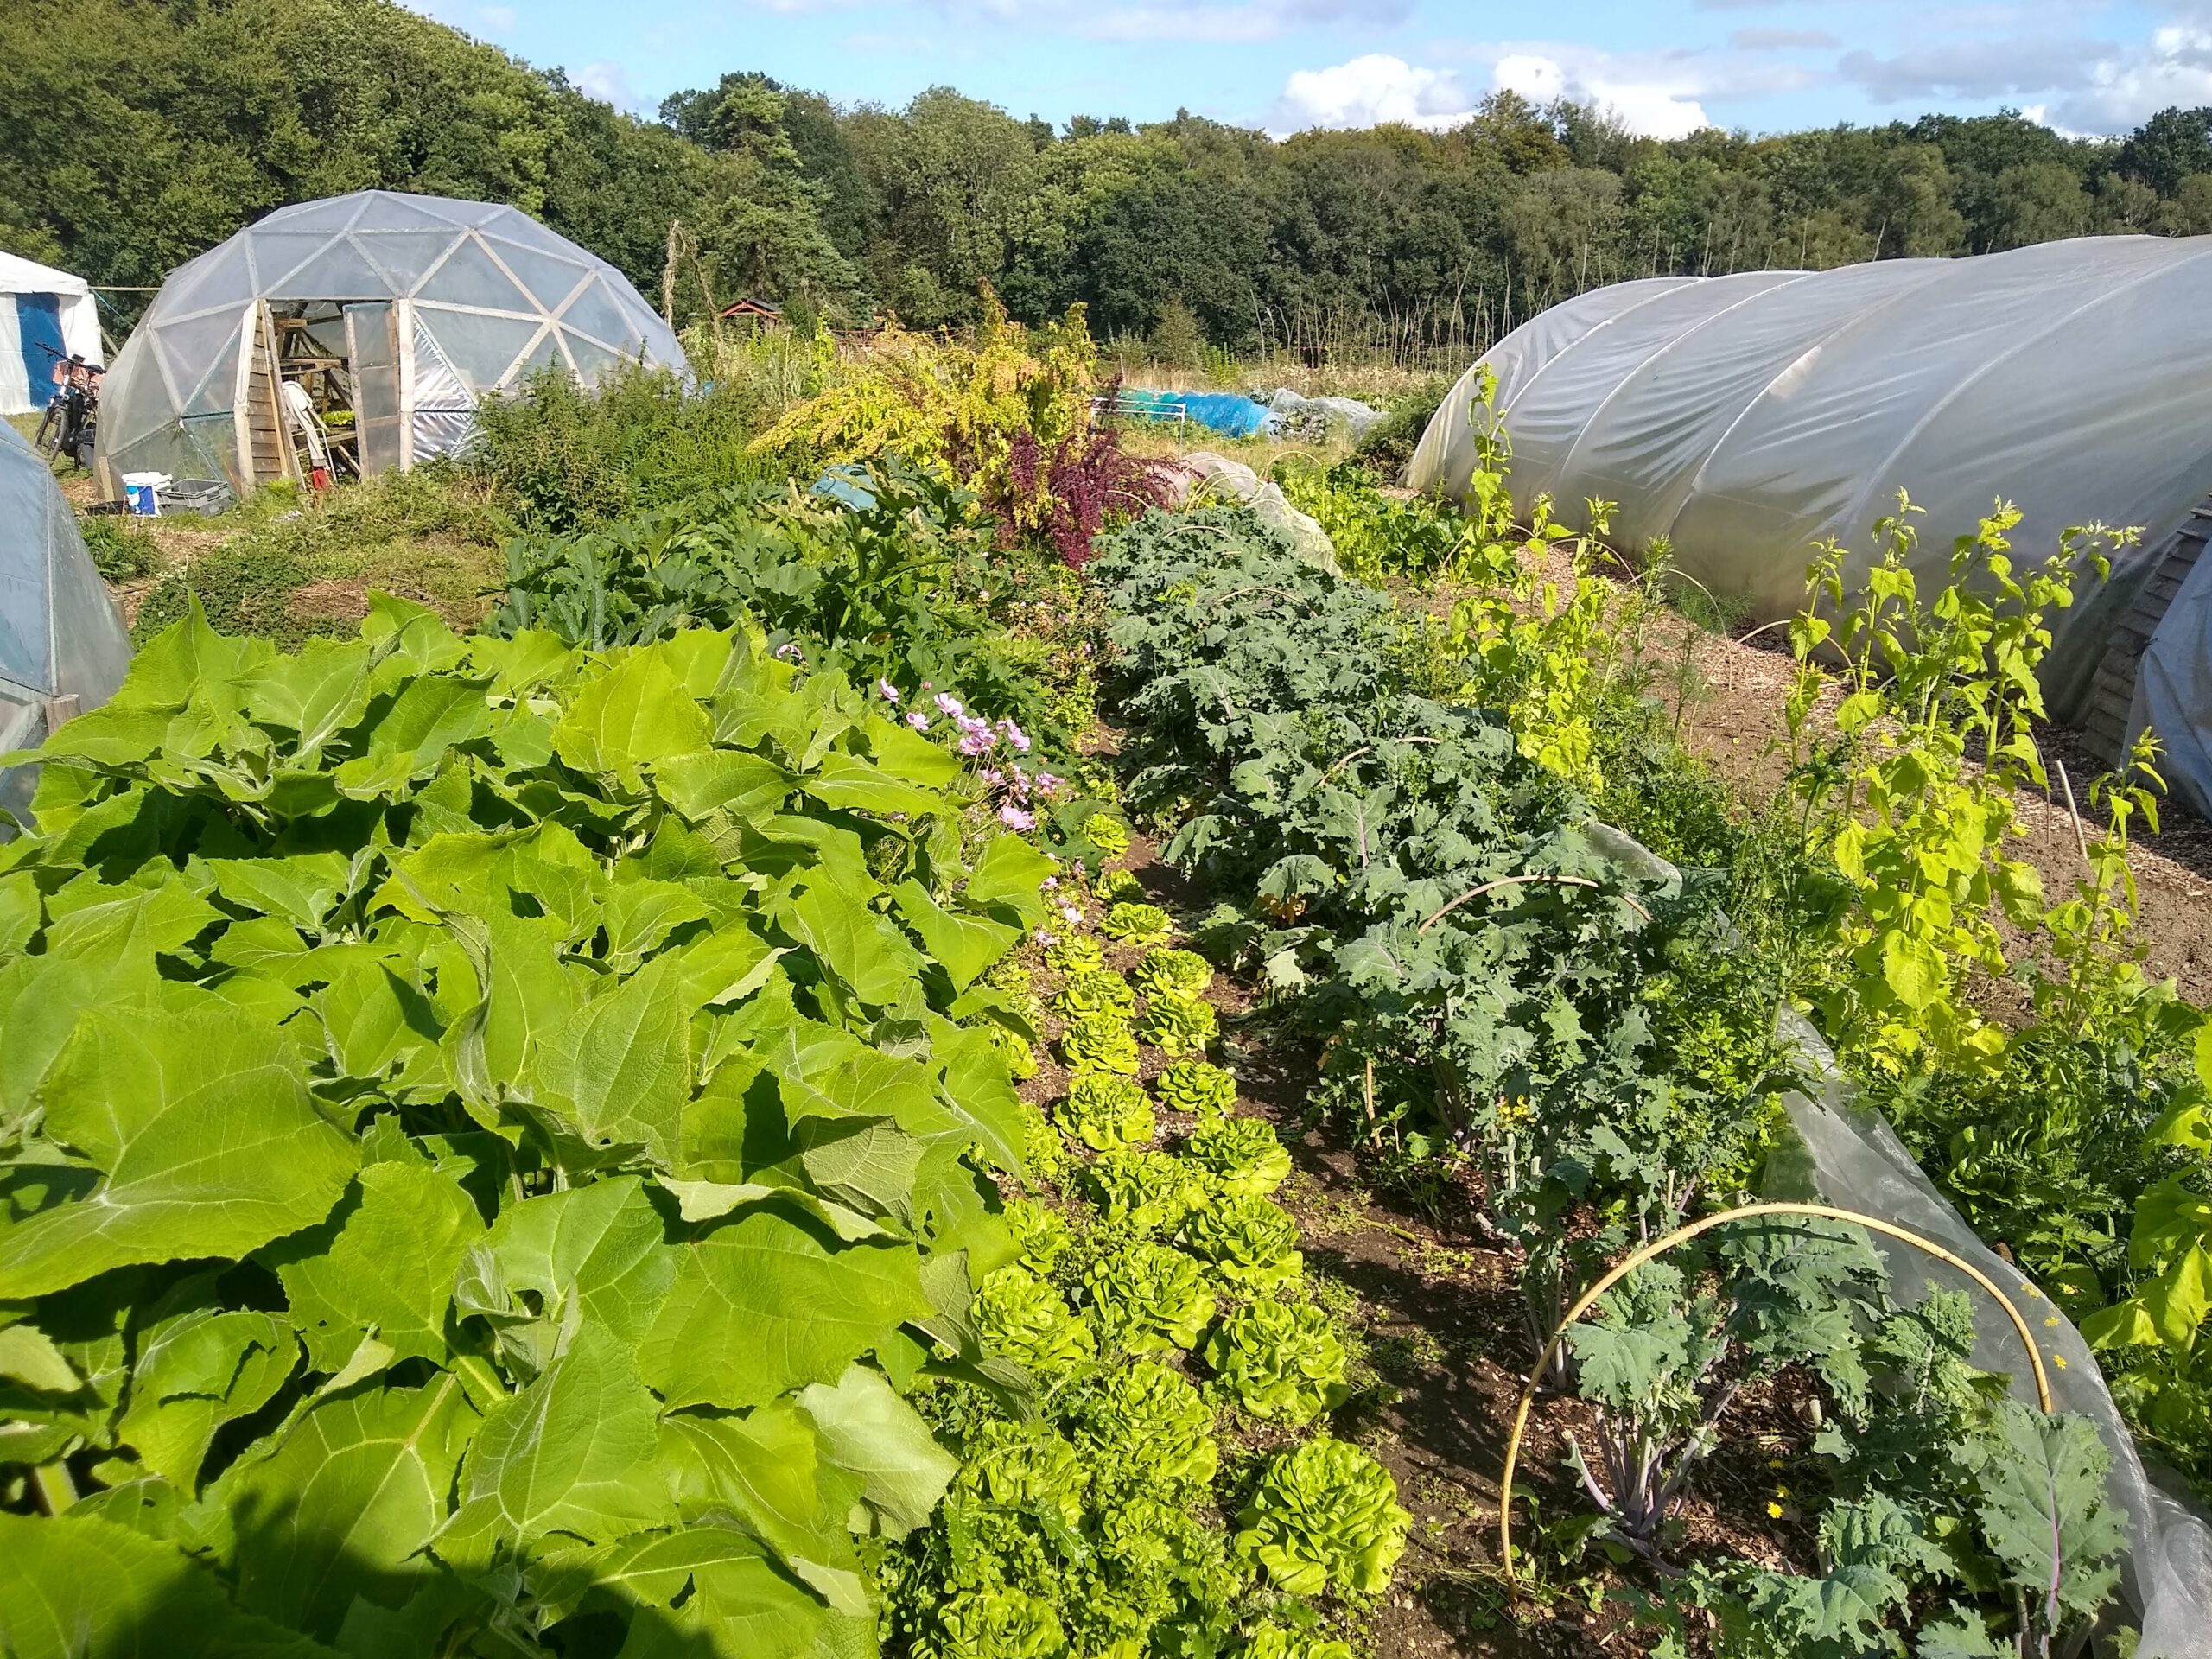 What’s Up With Agroecology Now!? 2019/05 Update